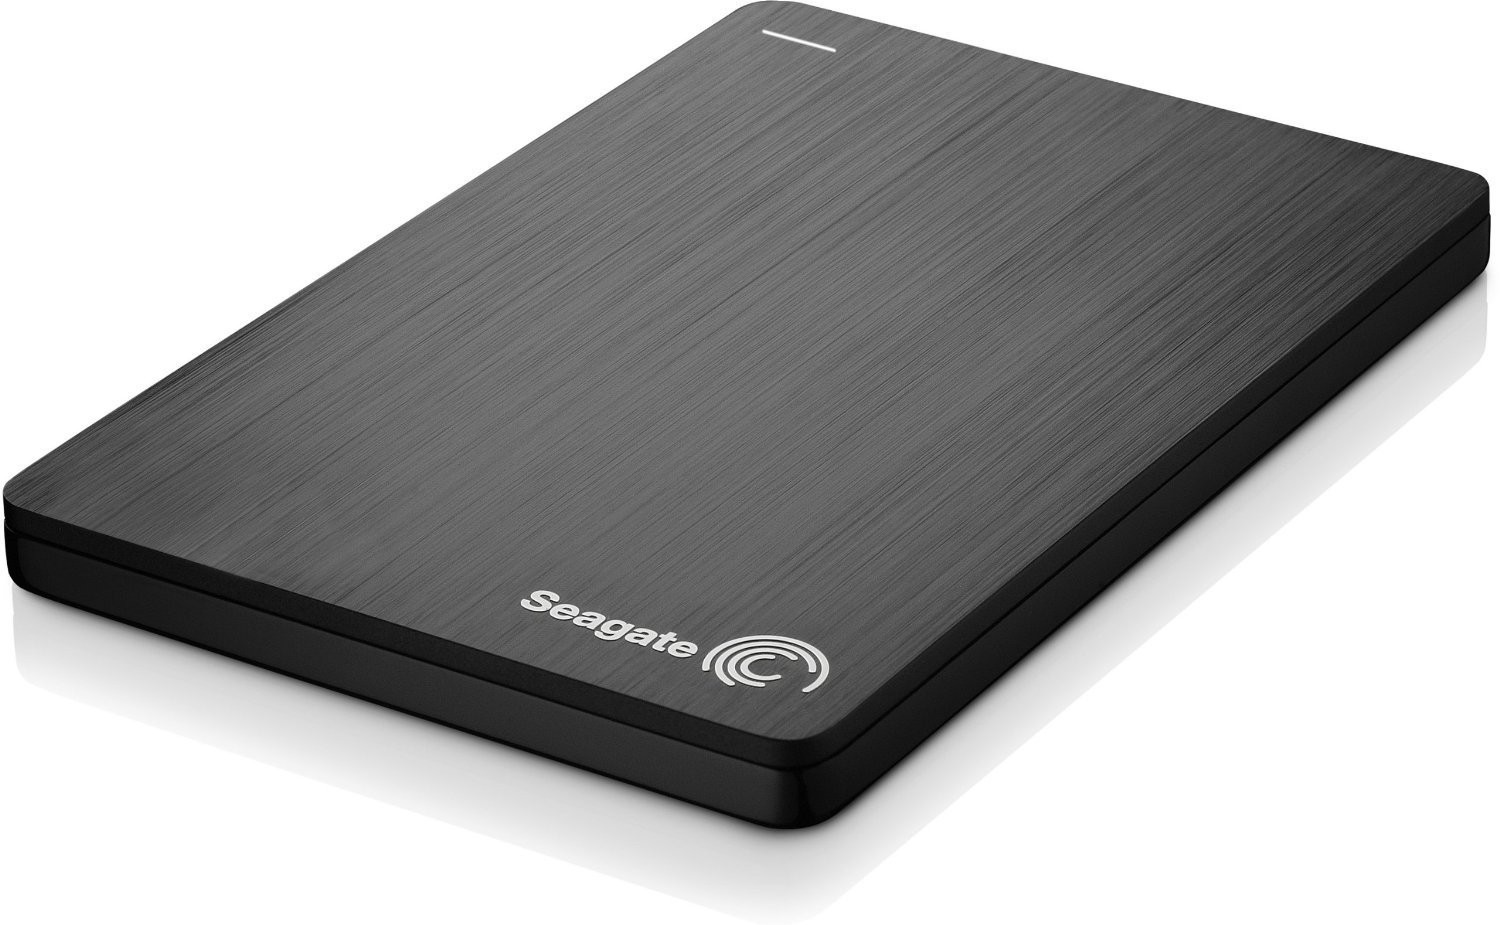 Seagate backup plus 1tb external hard drive with